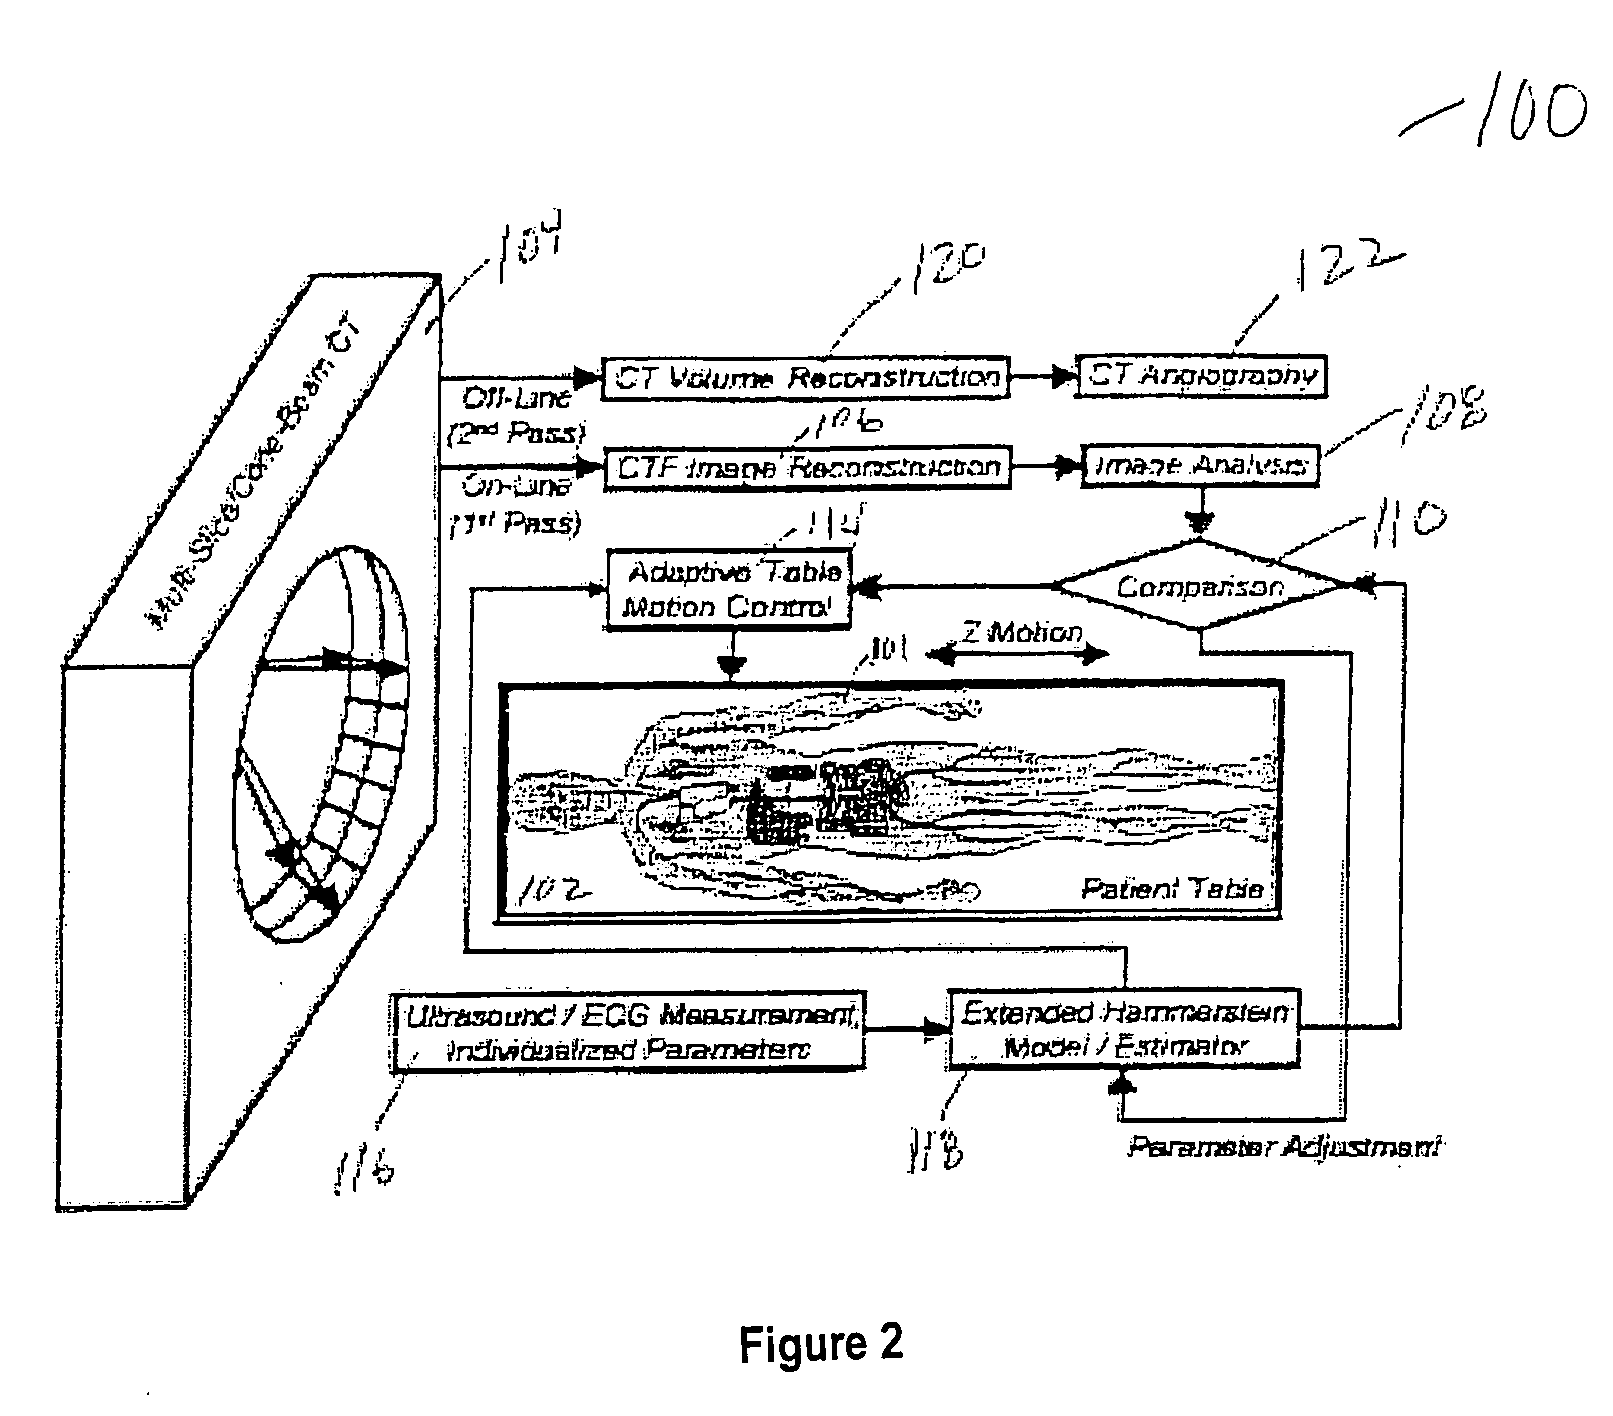 System and method for adaptive bolus chasing computed tomography (CT) angiography